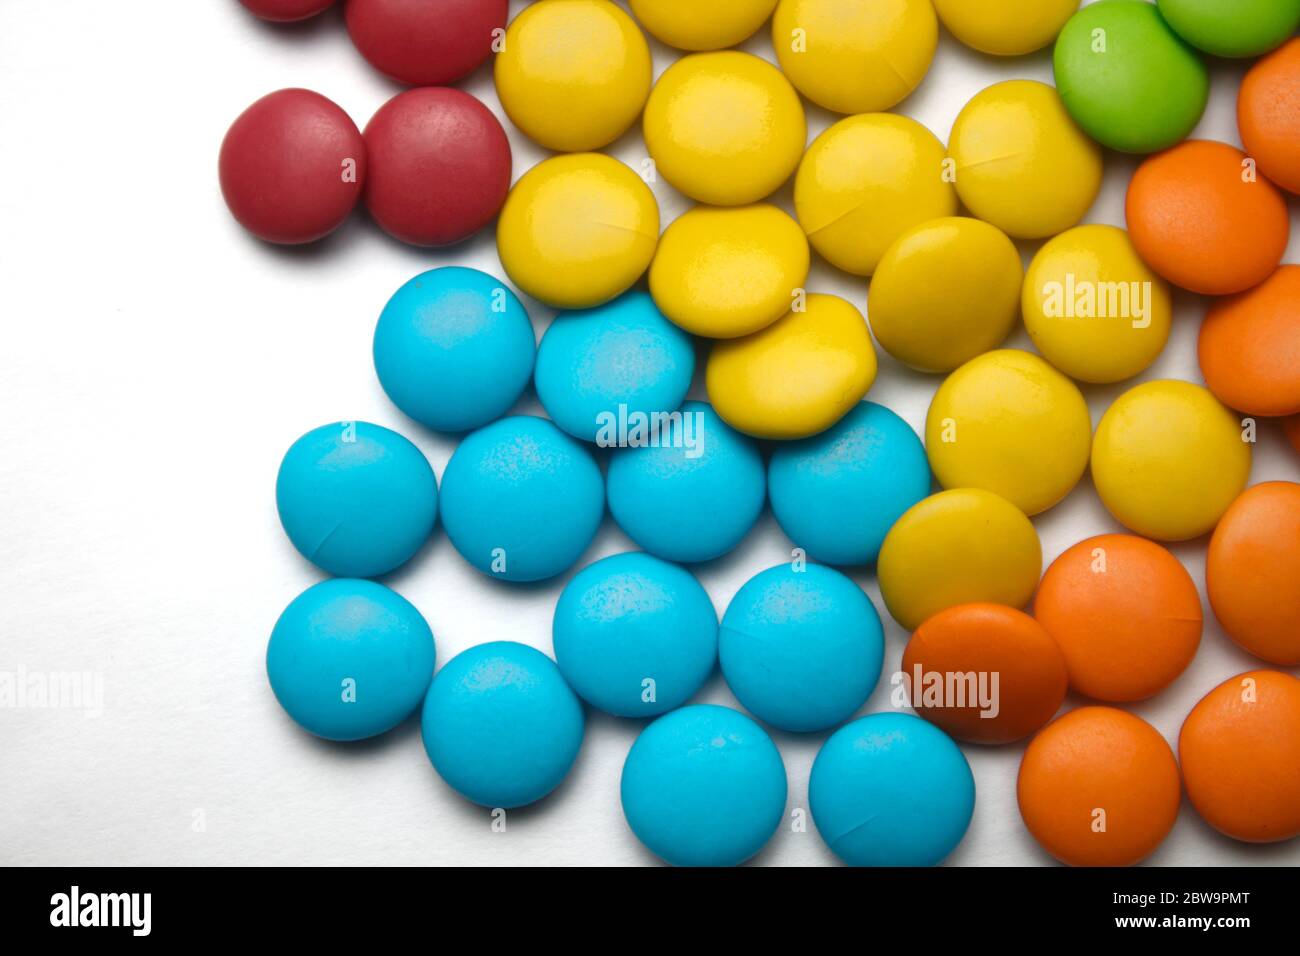 Colour full Chocolate Candies Stock Photo - Alamy